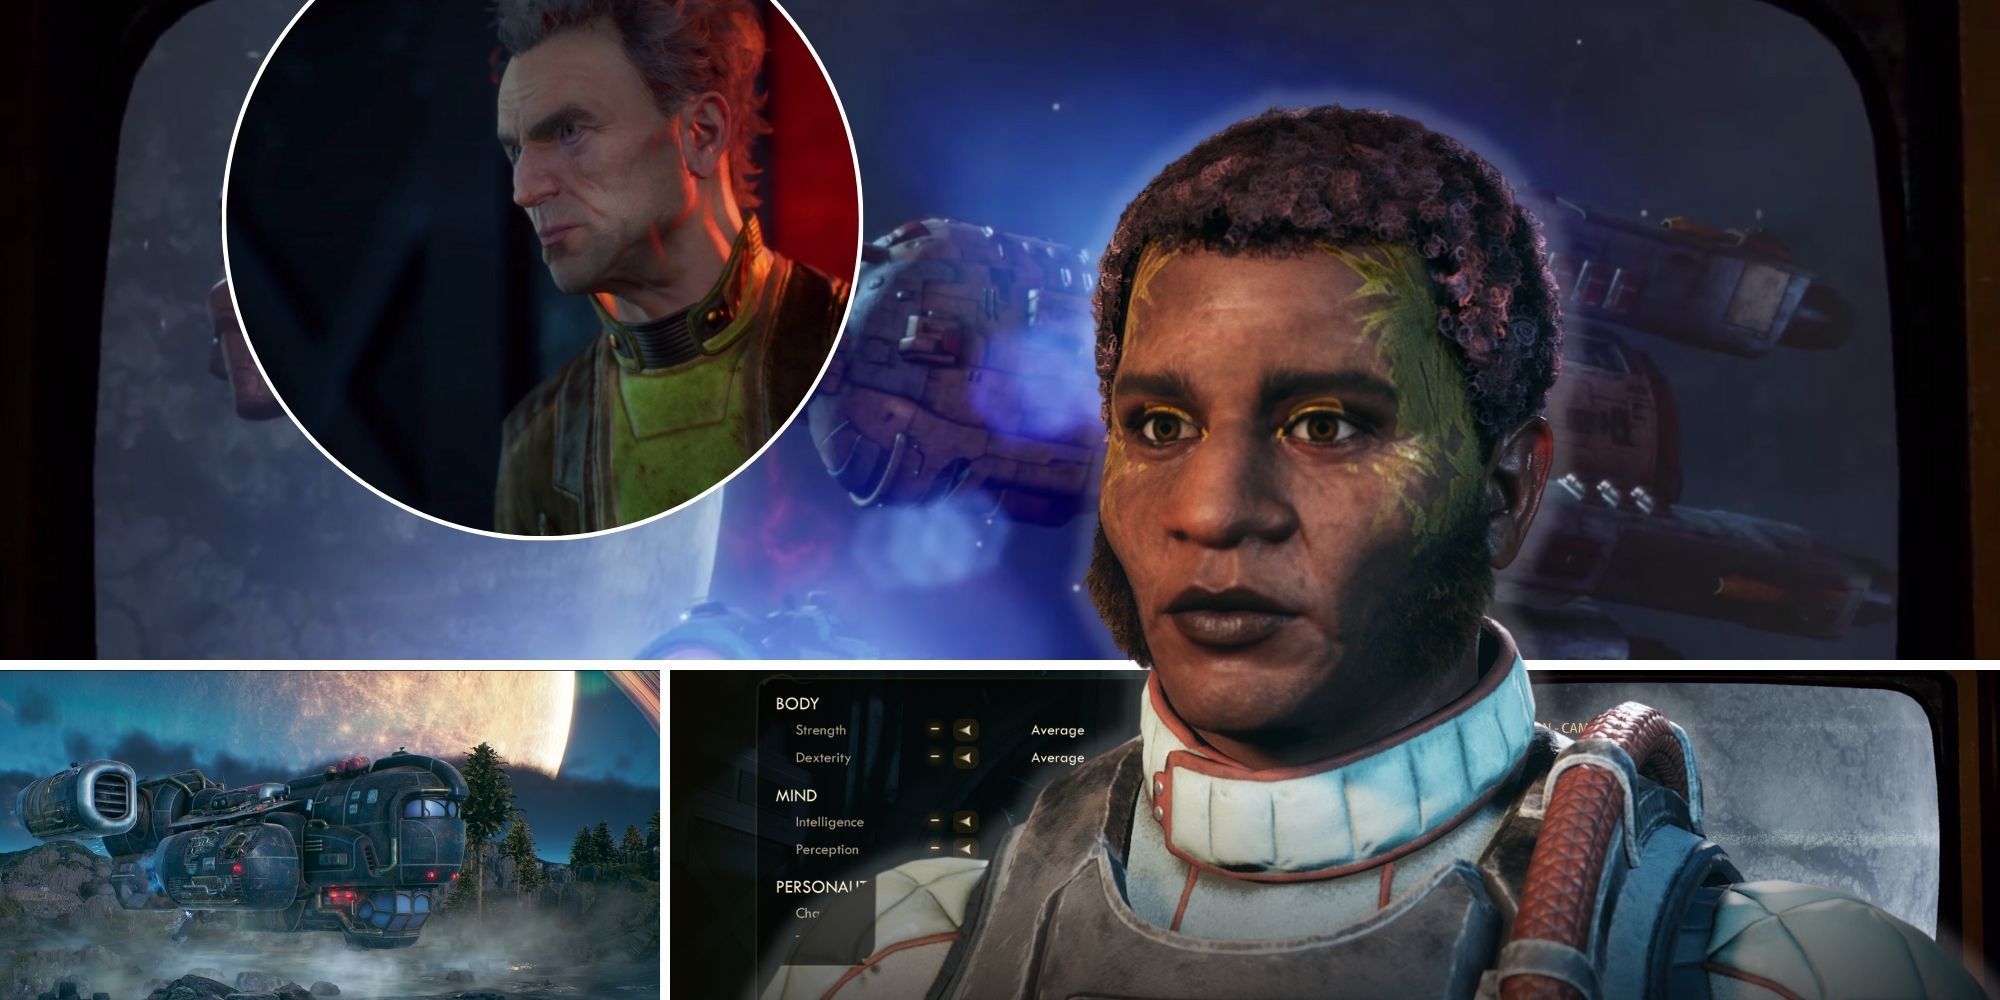 the outer worlds character creator, unreliable, and scientist in different panels